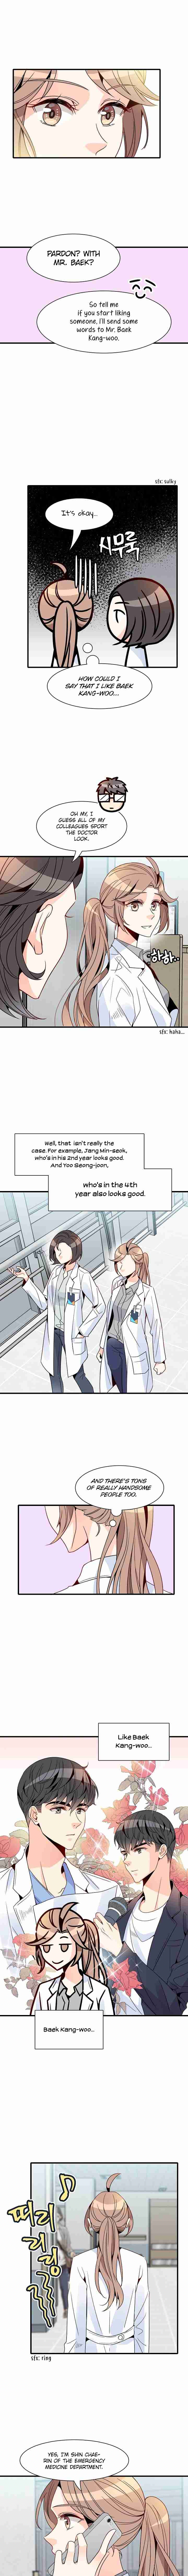 Emergency! How To Deal With Love Ch. 16